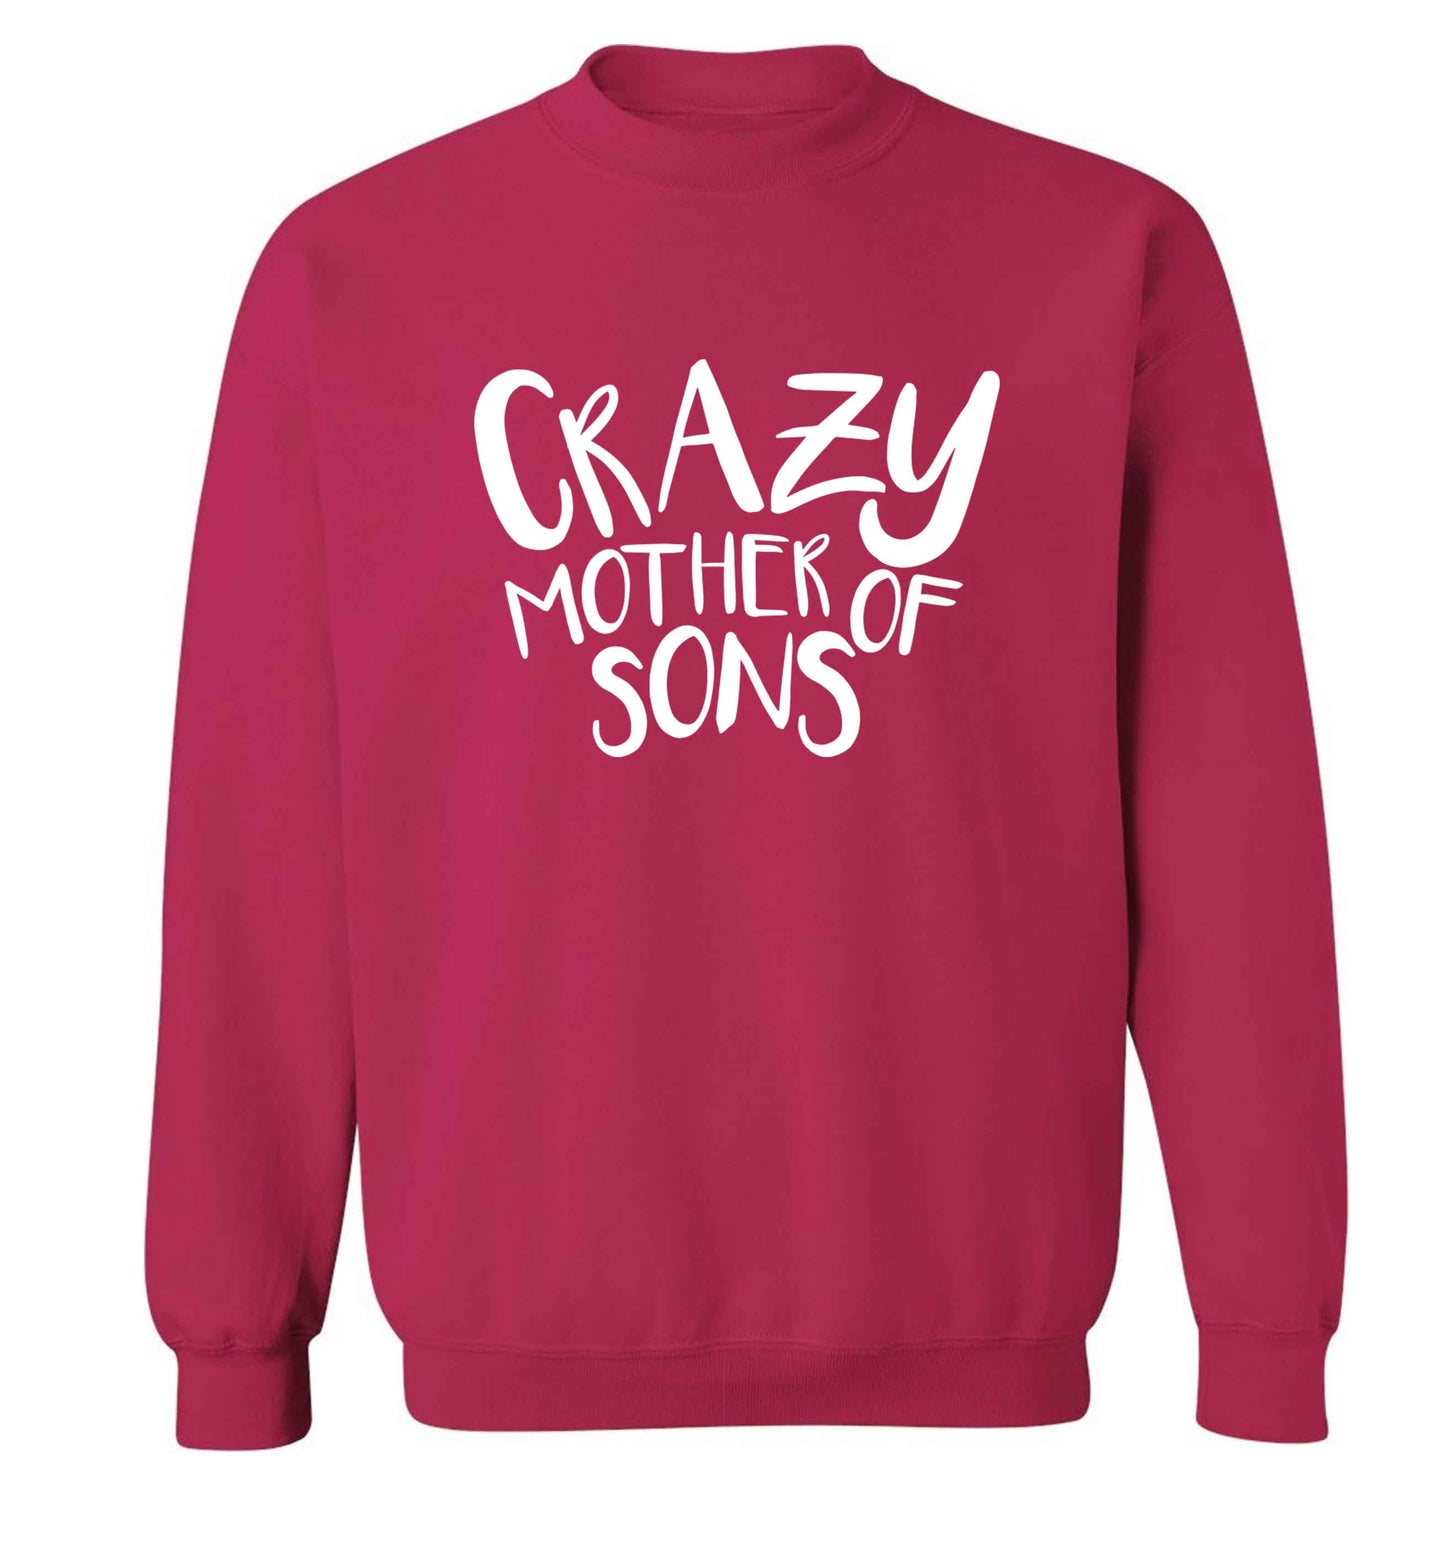 Crazy mother of sons adult's unisex pink sweater 2XL